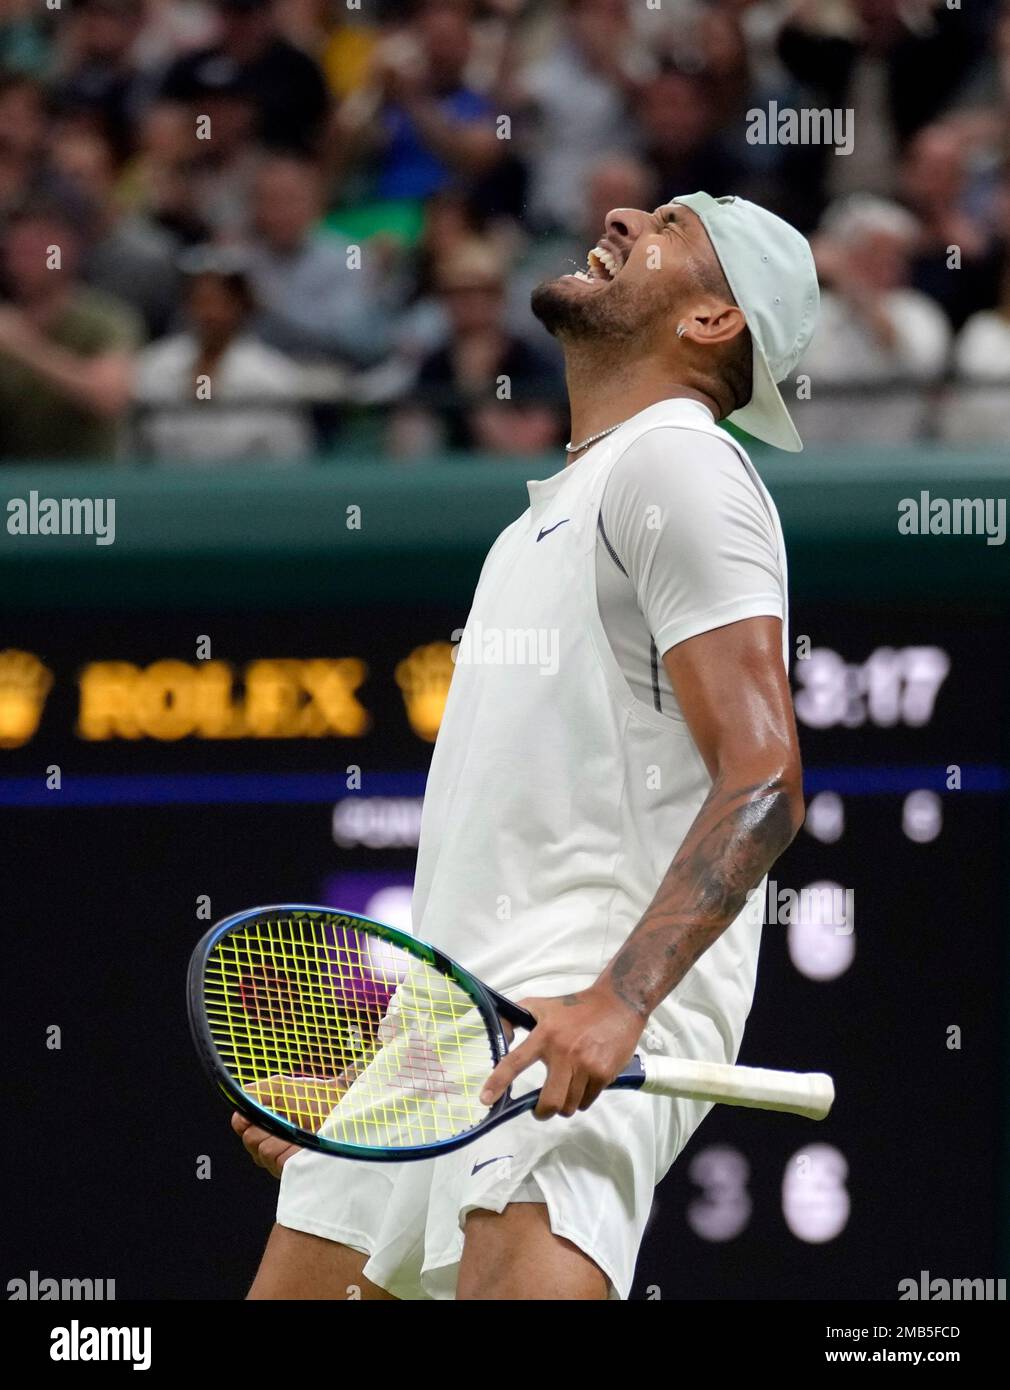 Australias Nick Kyrgios celebrates beating Greeces Stefanos Tsitsipas during their third round mens singles match on day six of the Wimbledon tennis championships in London, Saturday, July 2, 2022